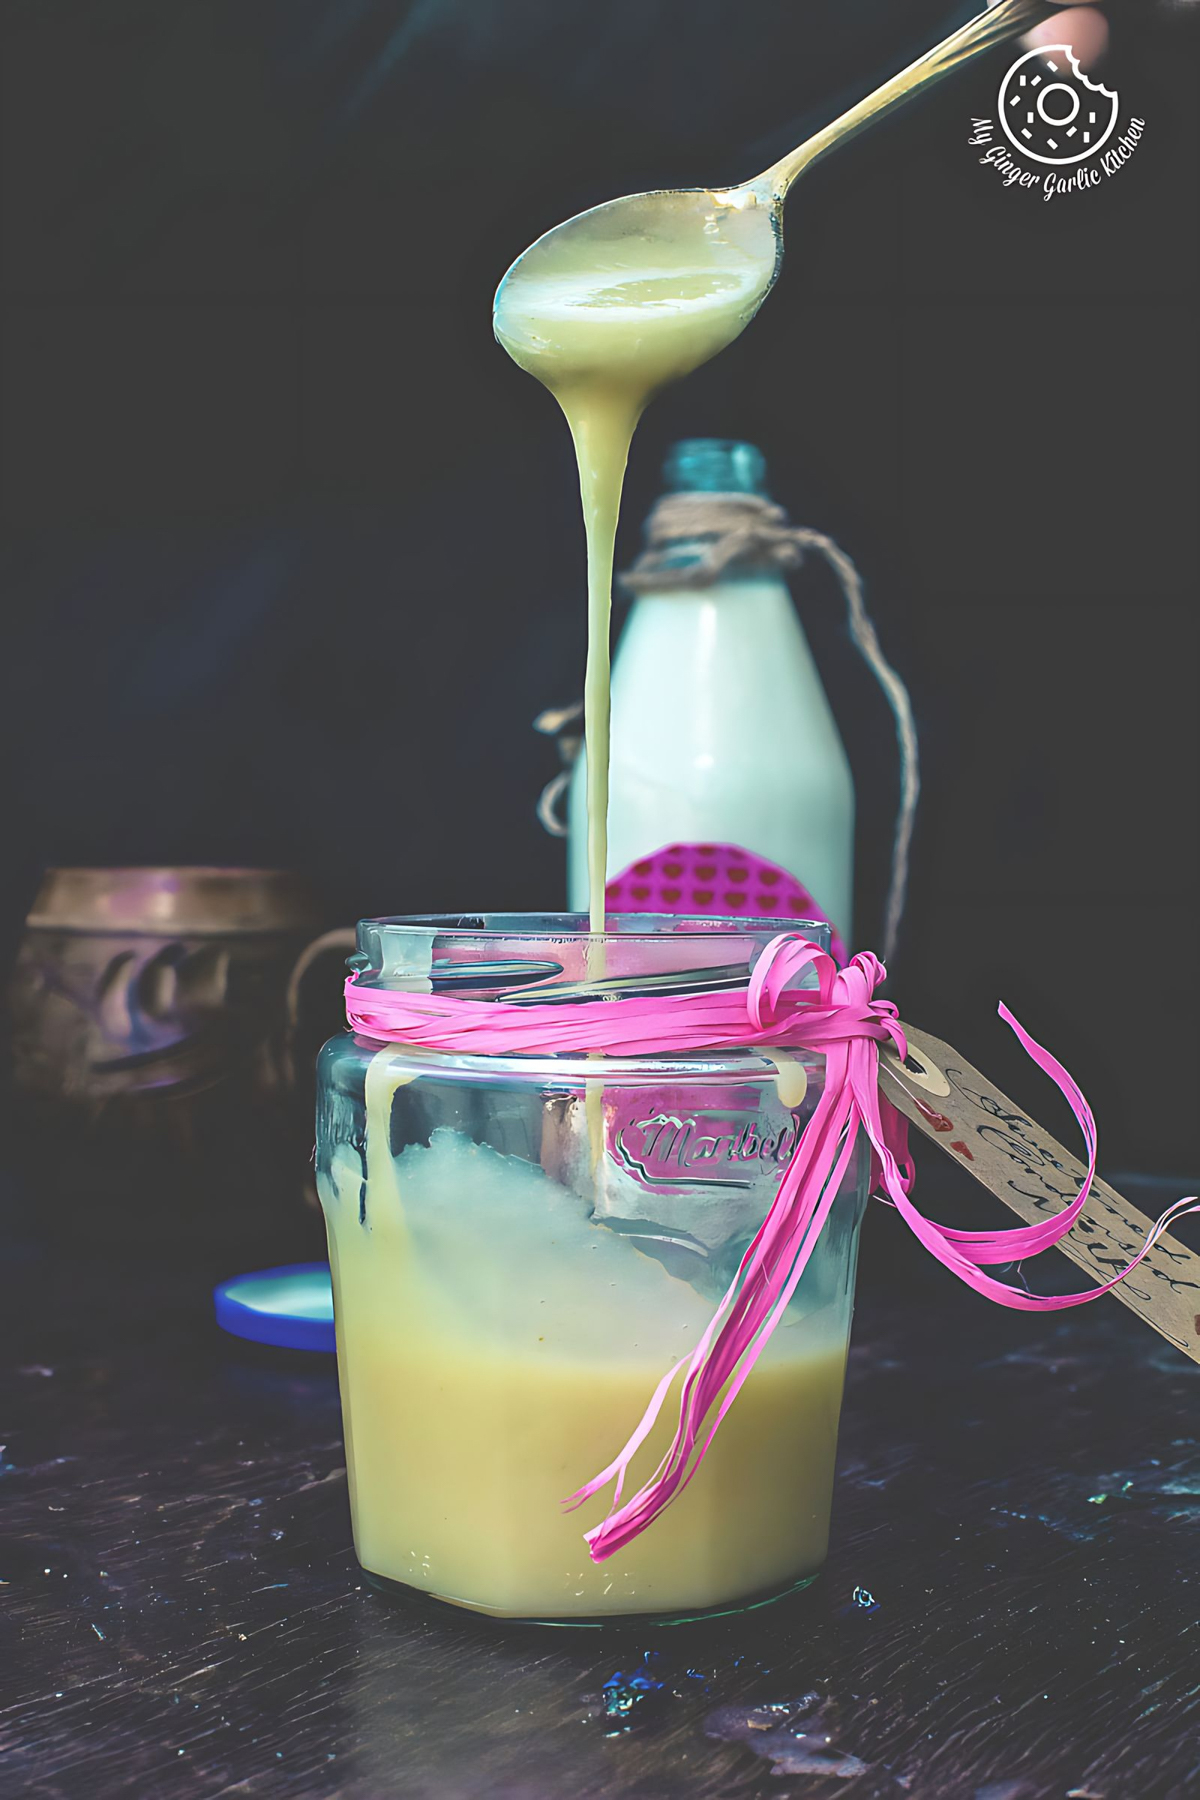 Image of How to Make Sweetened Condensed Milk